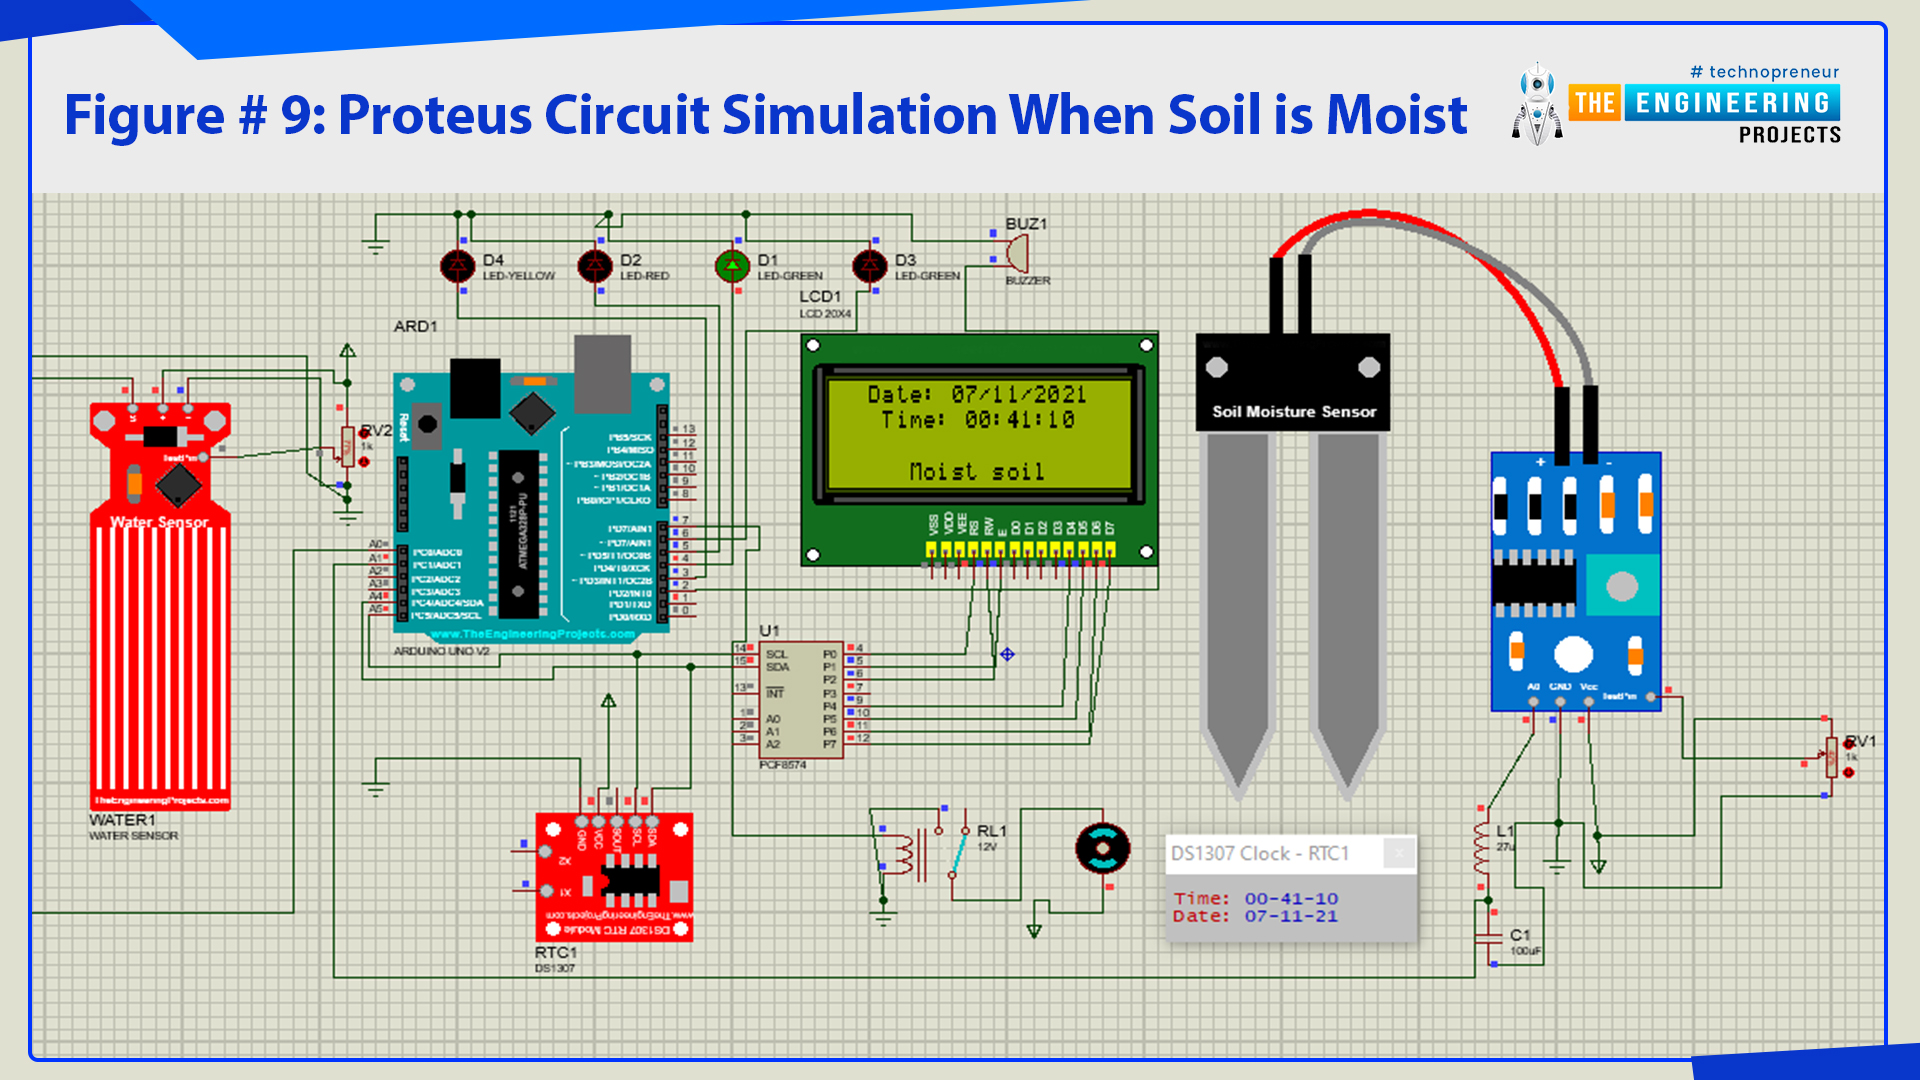 Automatic Plant Watering System using Arduino, Automatic Plant Watering System, Automatic Plant Watering Project, Plant Watering System, Plant Watering Project, Irrigation project, proteus simulation of plant watering system